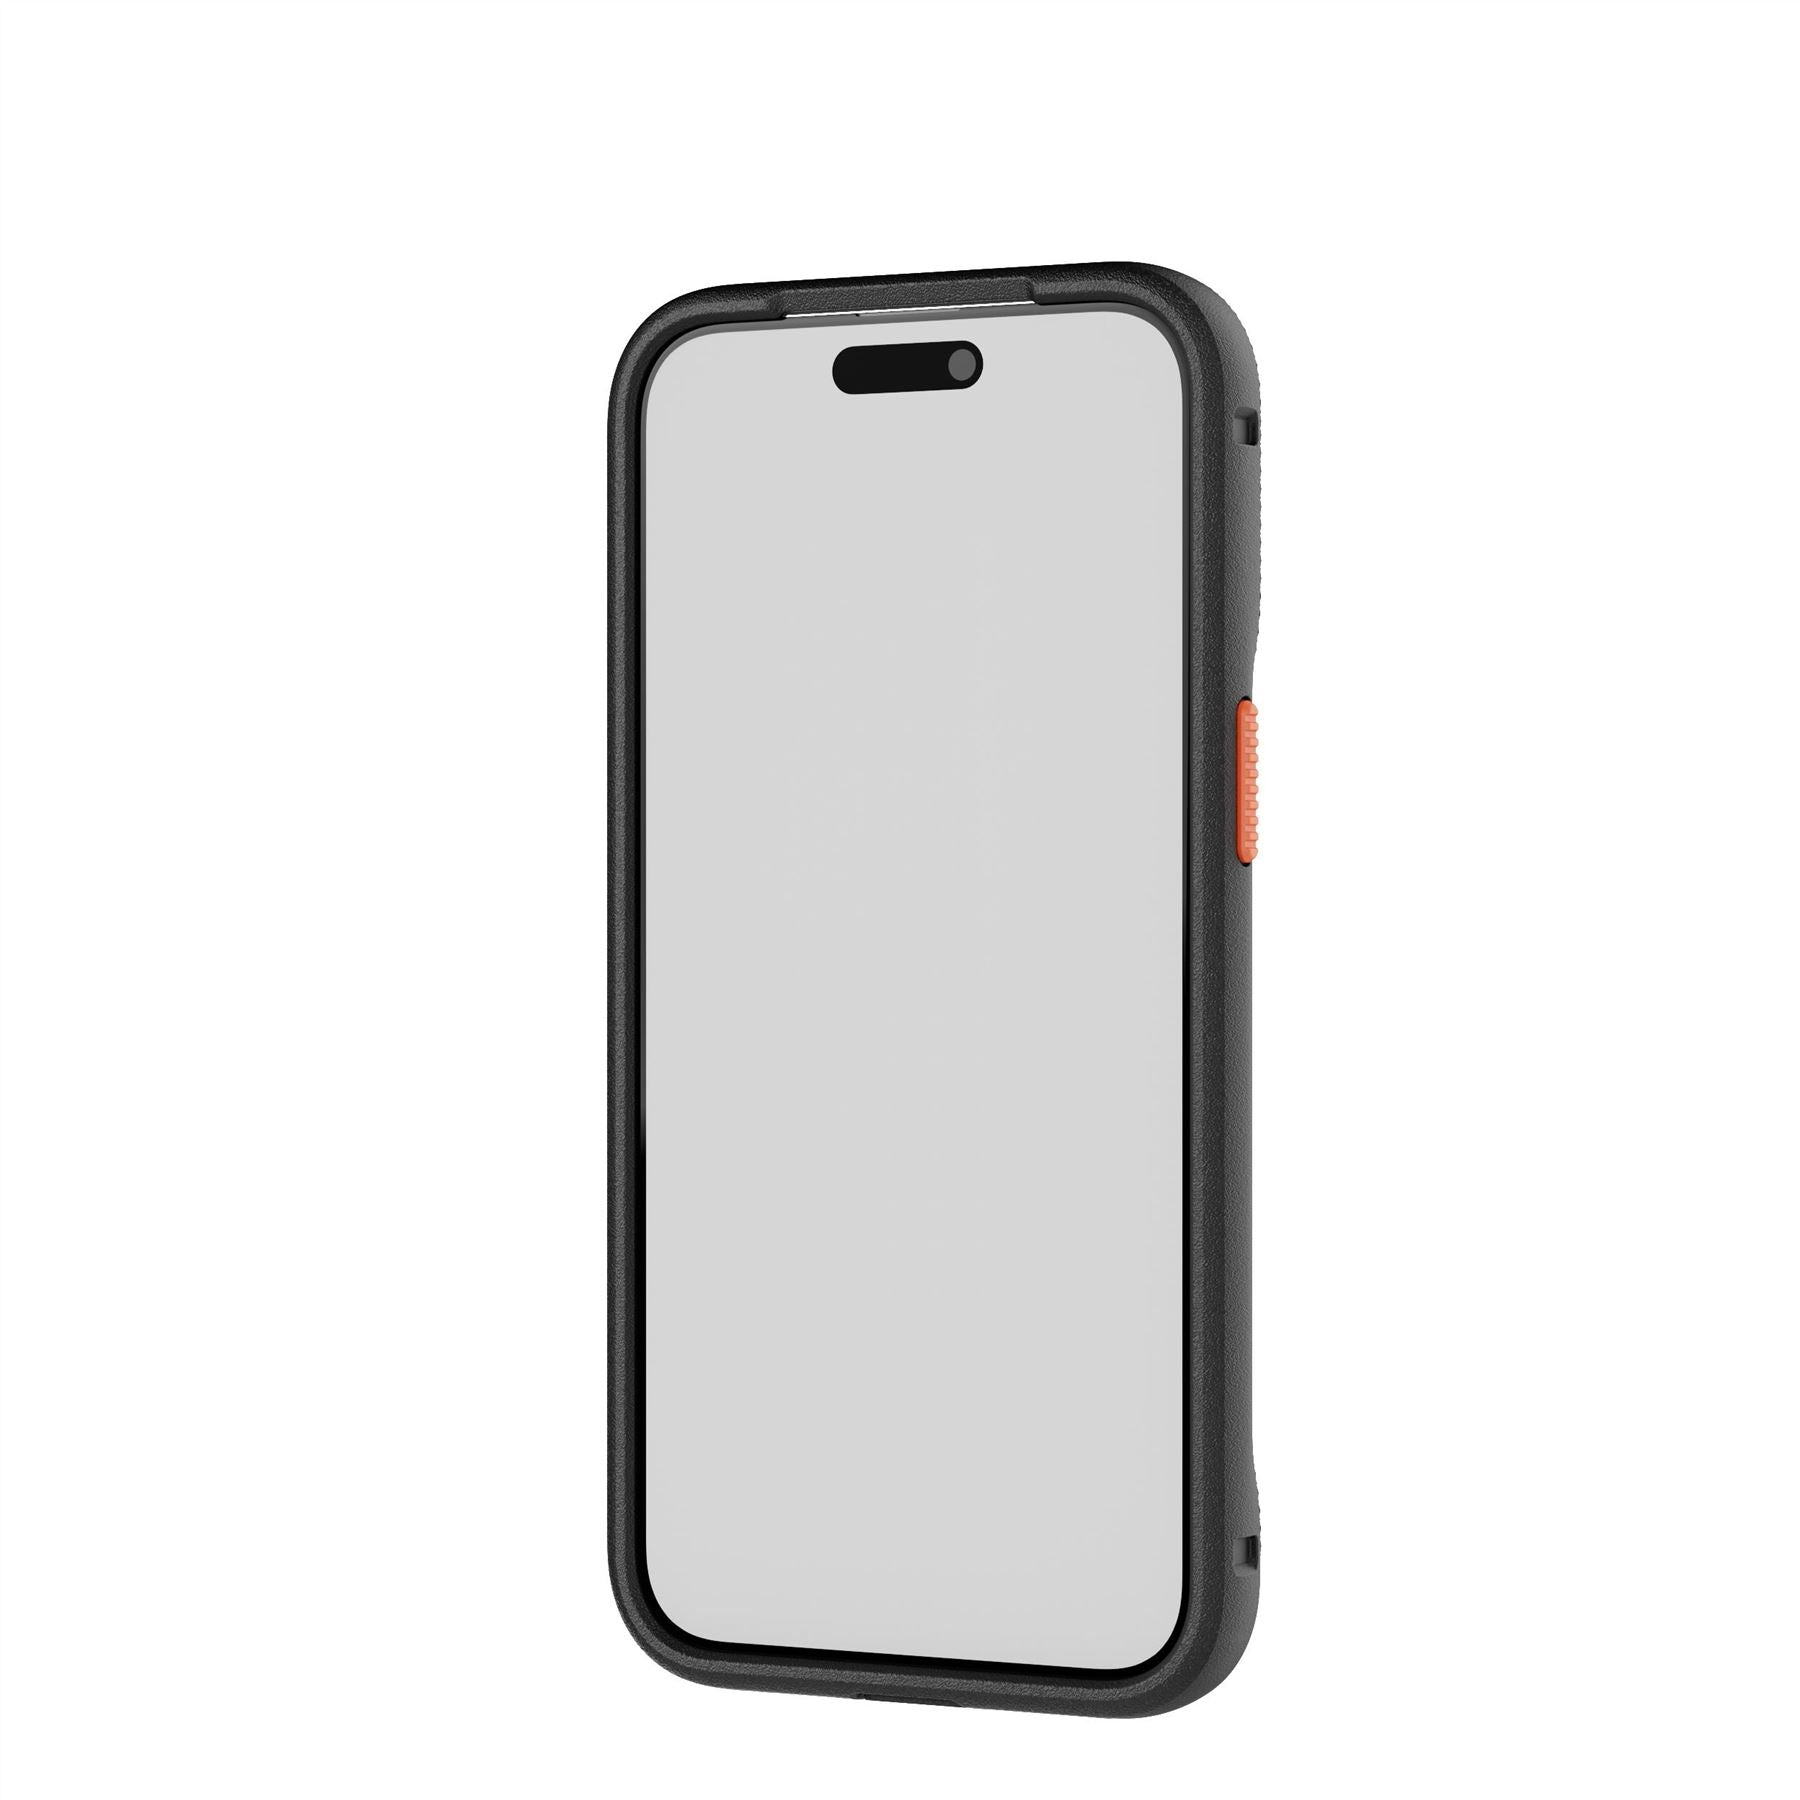 Evo Max - Apple iPhone 13 Mini Case with Holster - Off Black